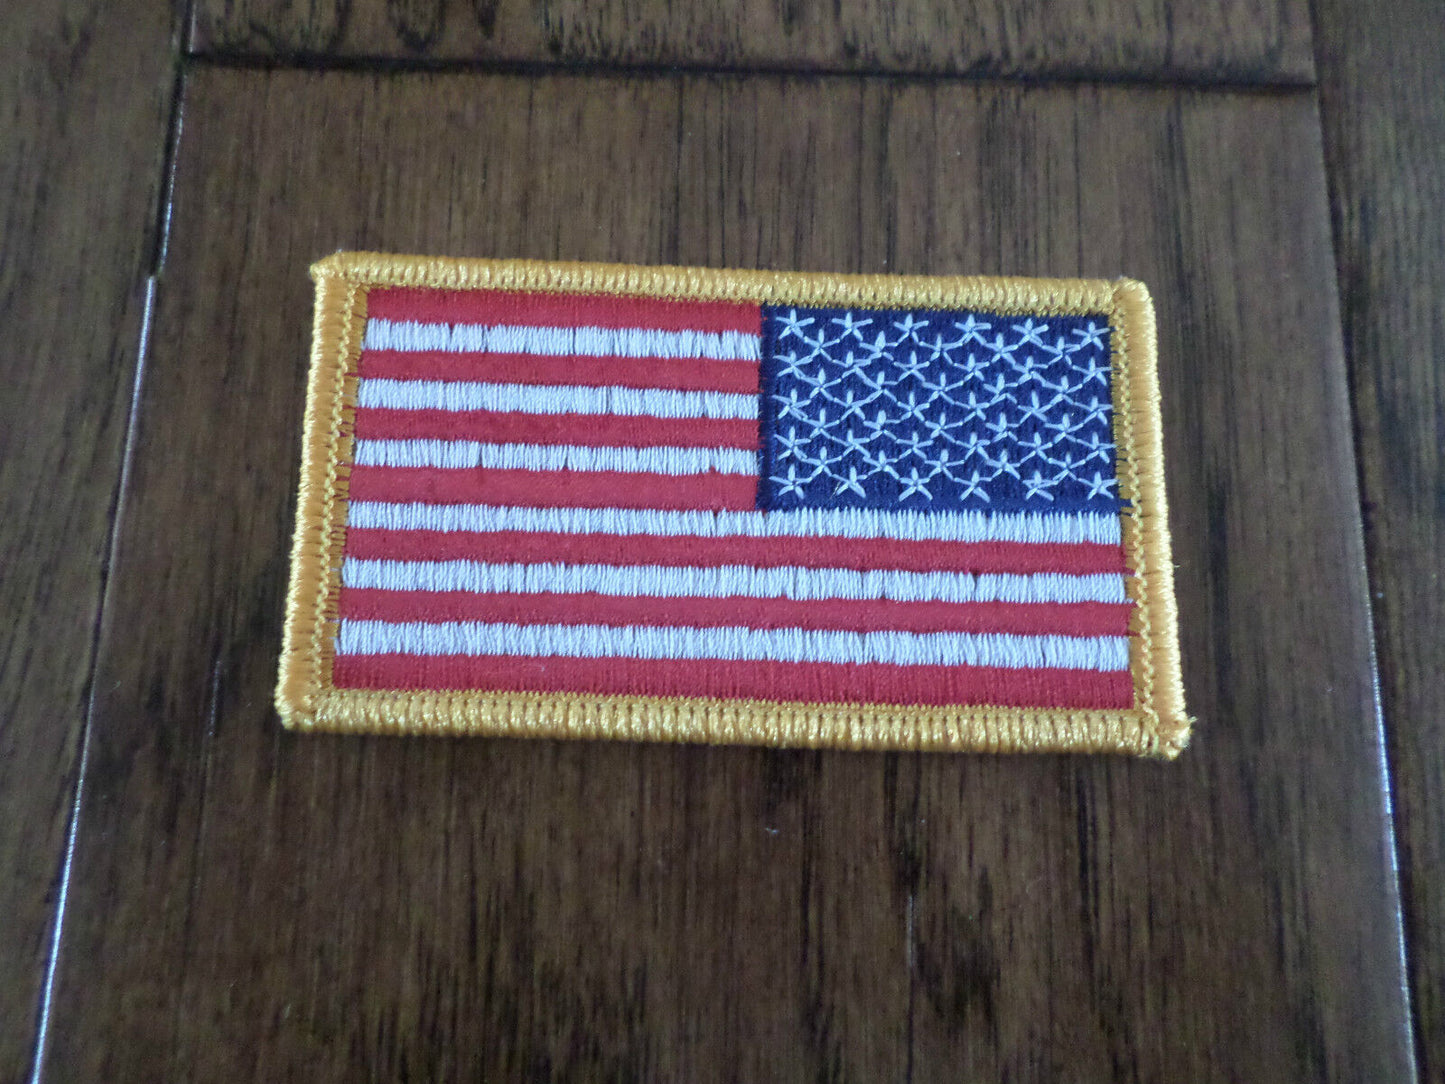 U.S MILITARY ISSUE AMERICAN FLAG SHOULDER SLEEVE PATCH  FULL COLOR  U.S FLAG